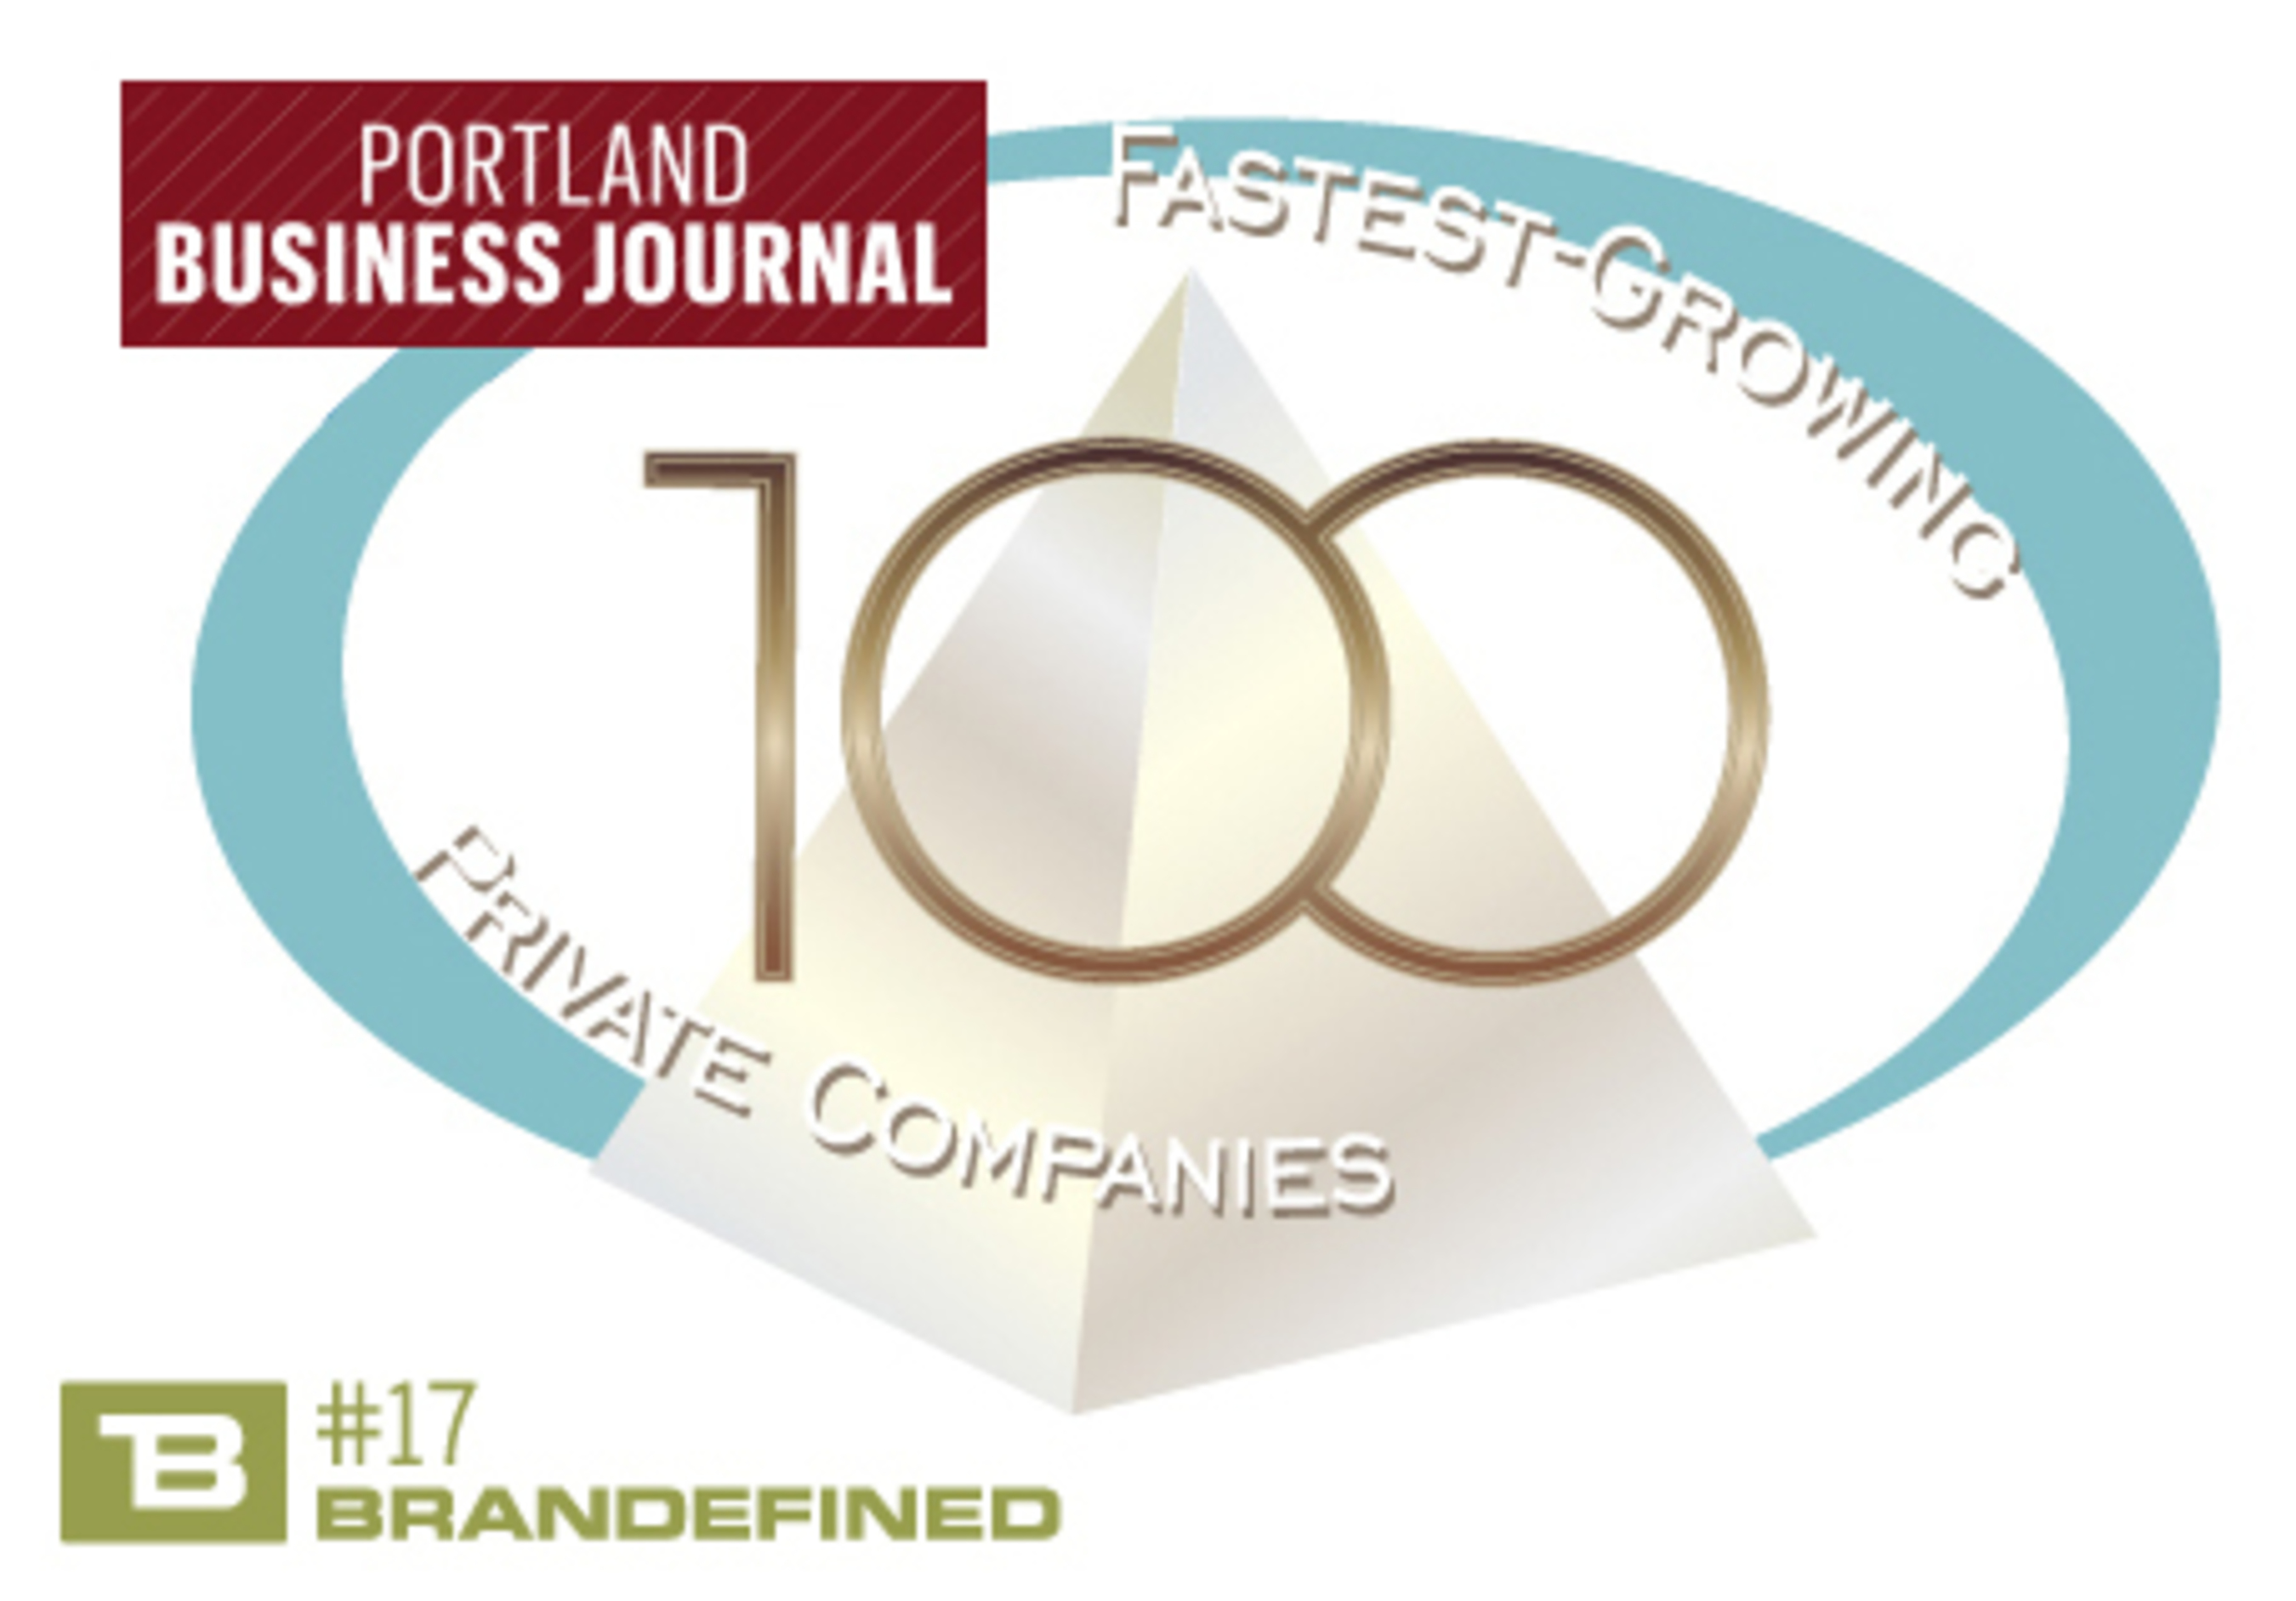 Brandefined ranked #17 on the Portland Business Journal's List of the Top 100 Fastest Growing Private Companies in Oregon. (PRNewsFoto/Brandefined)